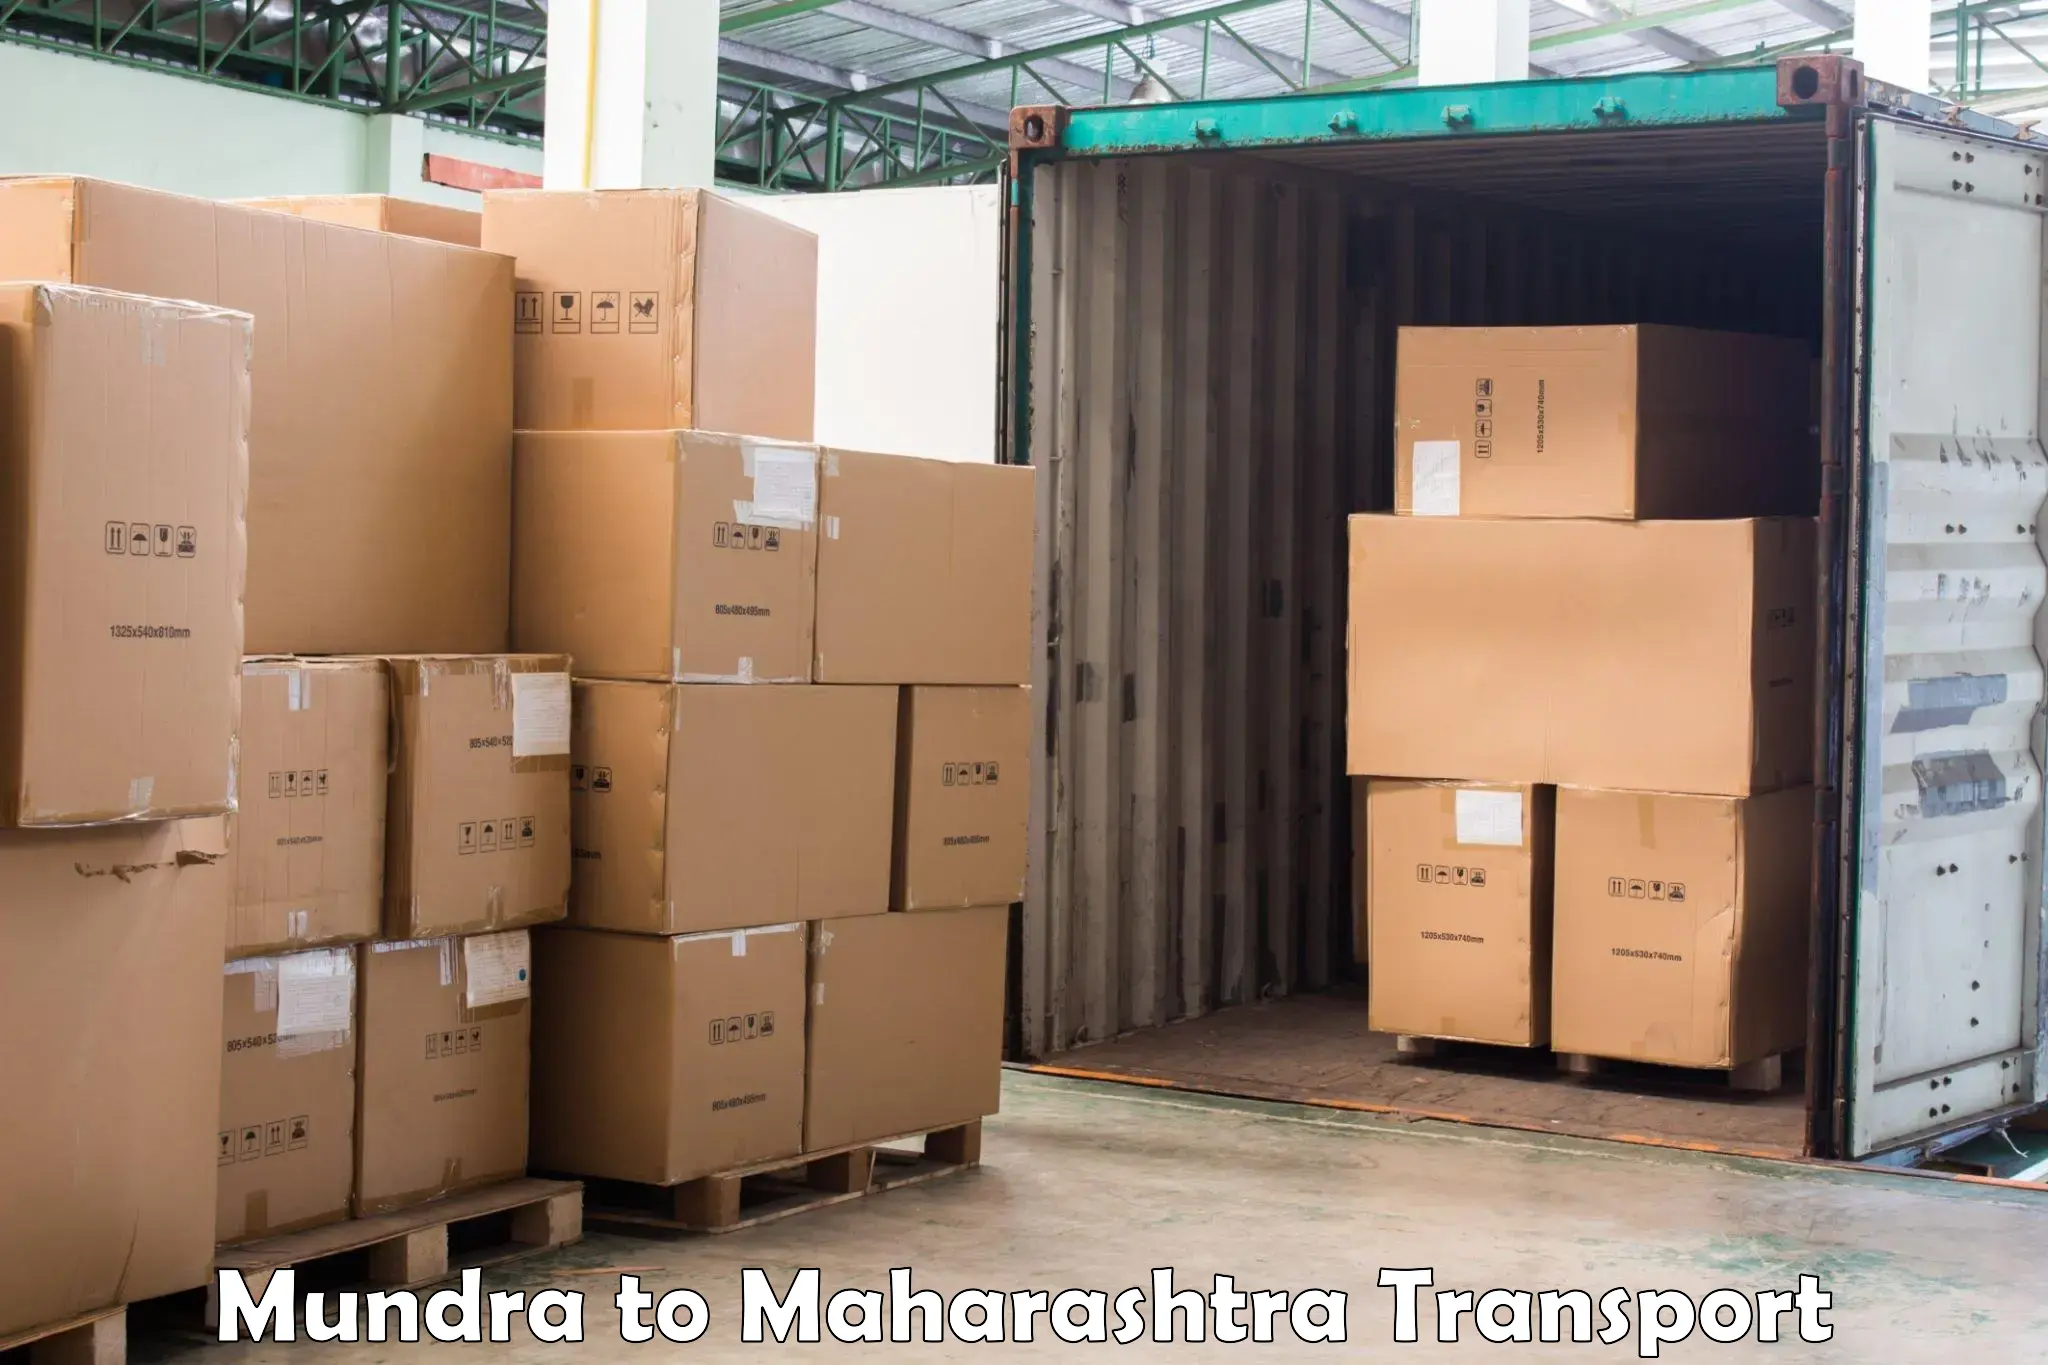 Transport bike from one state to another Mundra to Ballarpur